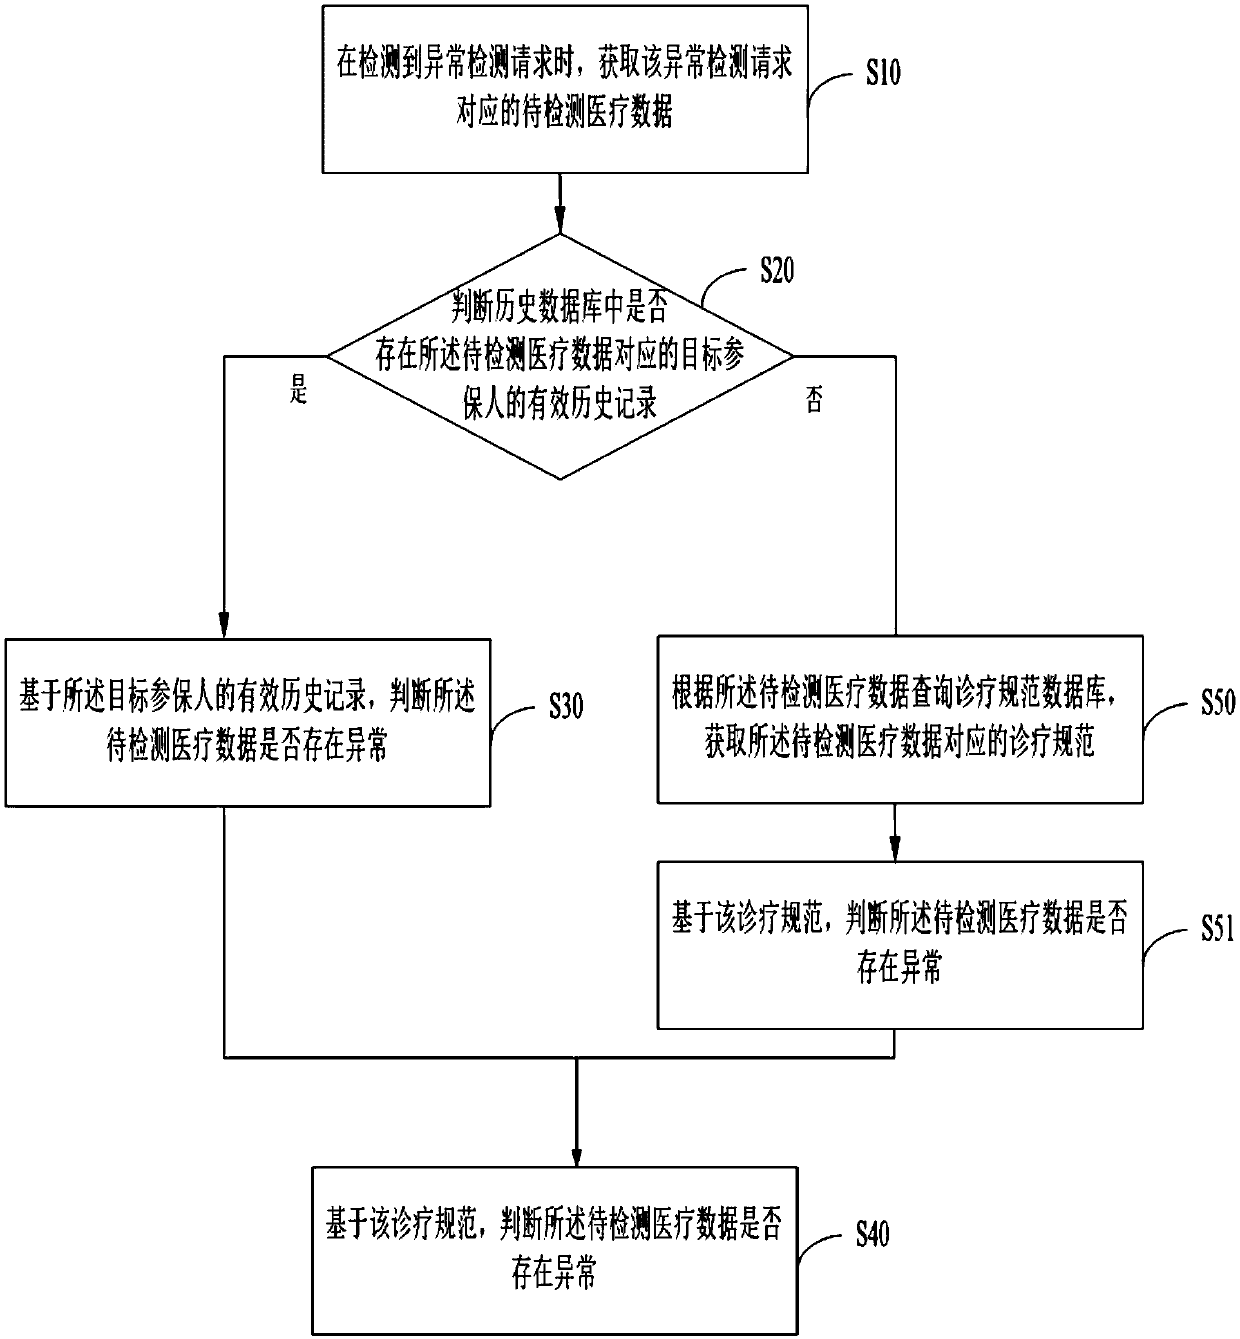 Medical data abnormality detection method and device, apparatus, and storage medium